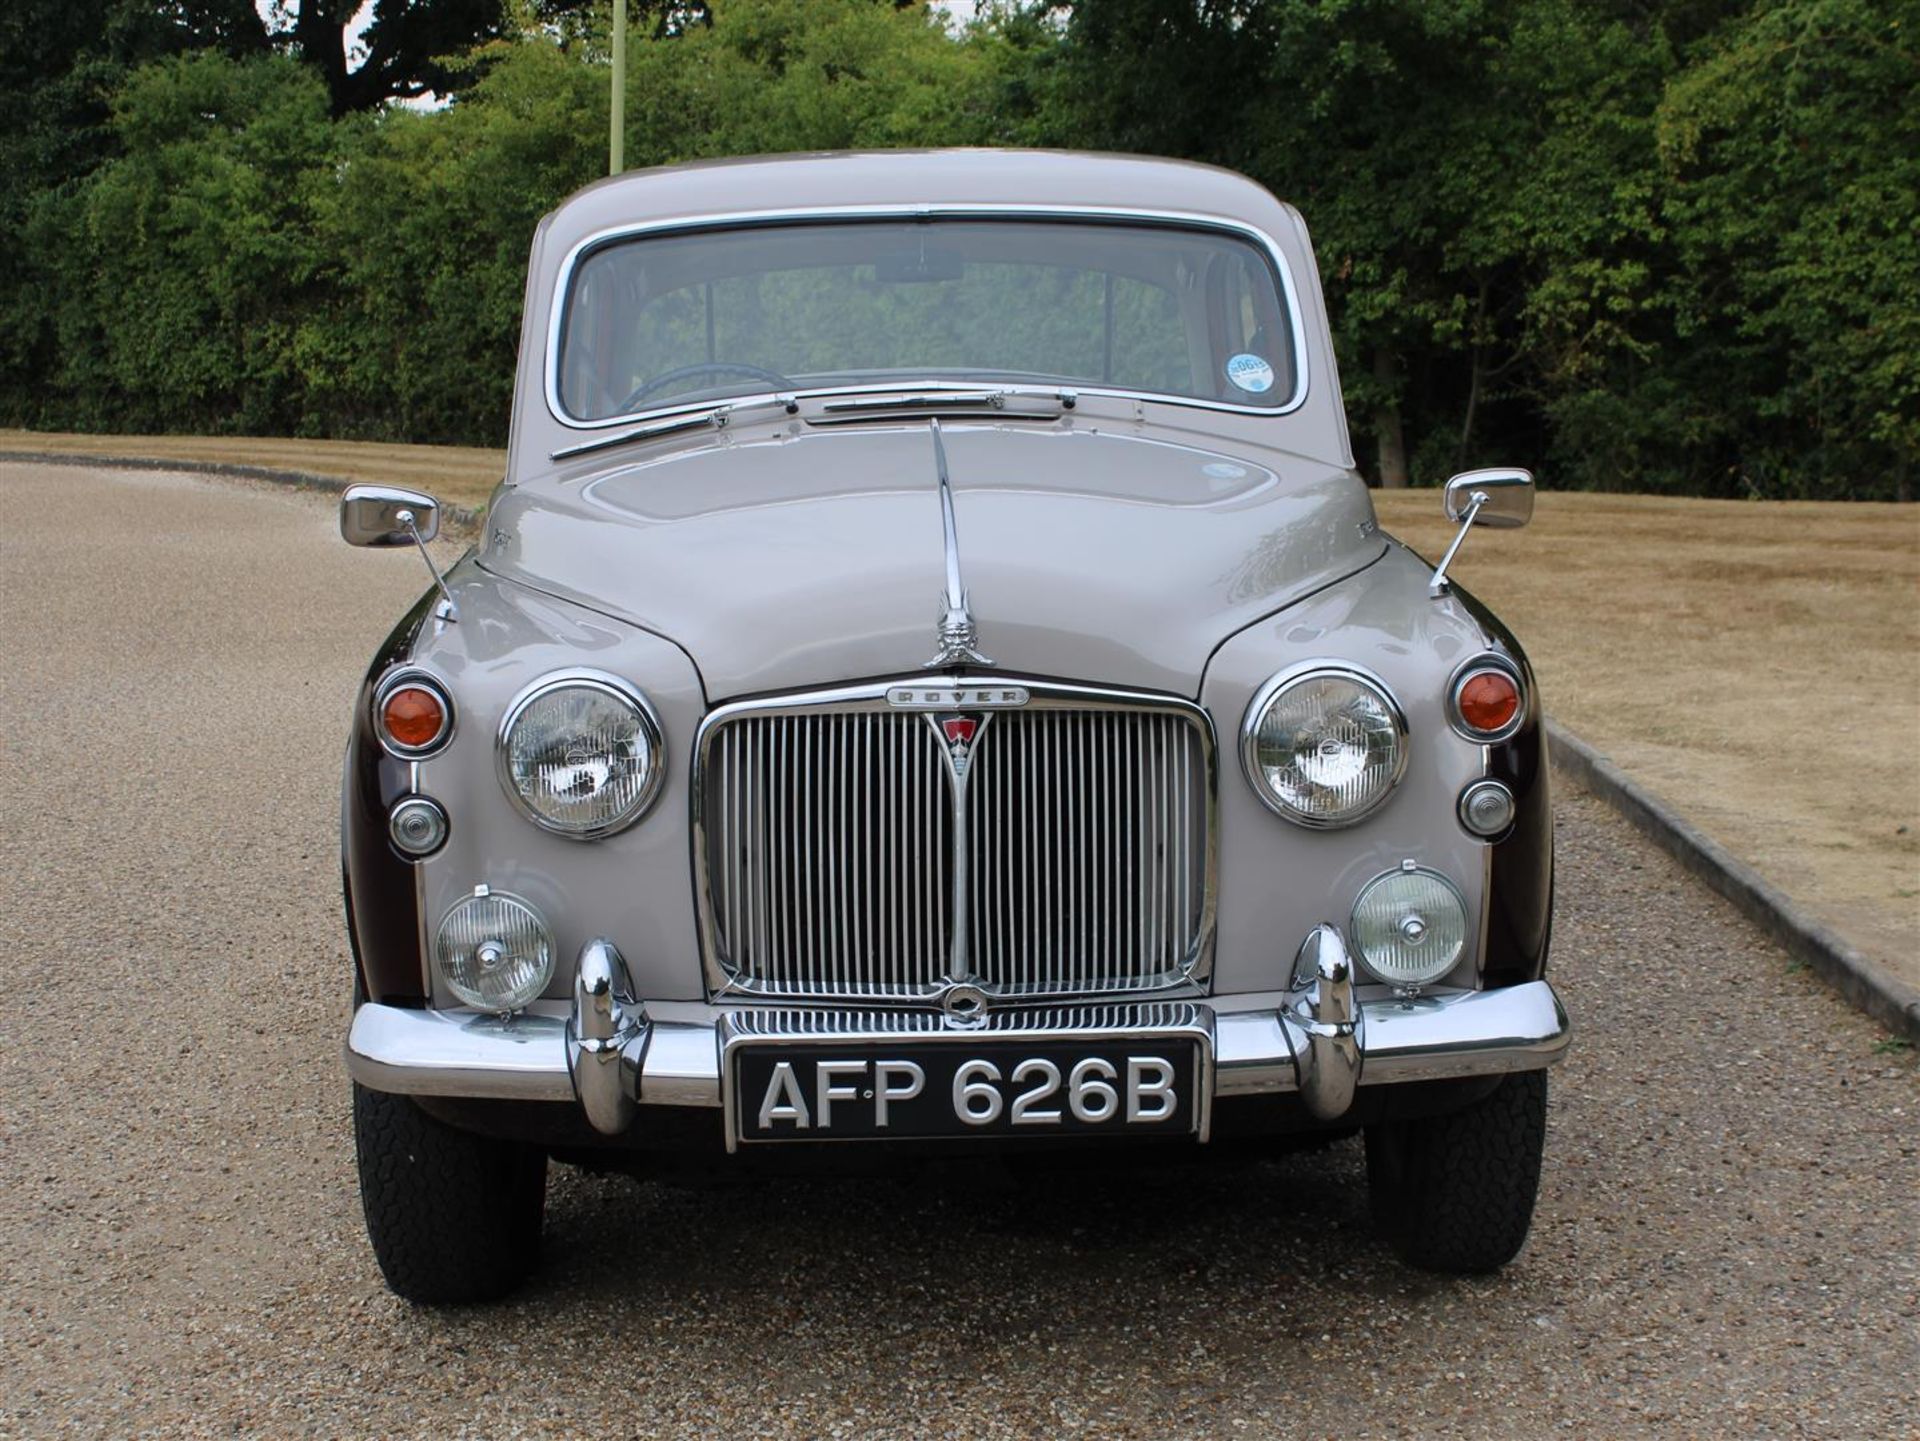 1964 Rover P4 95 Saloon - Image 2 of 23